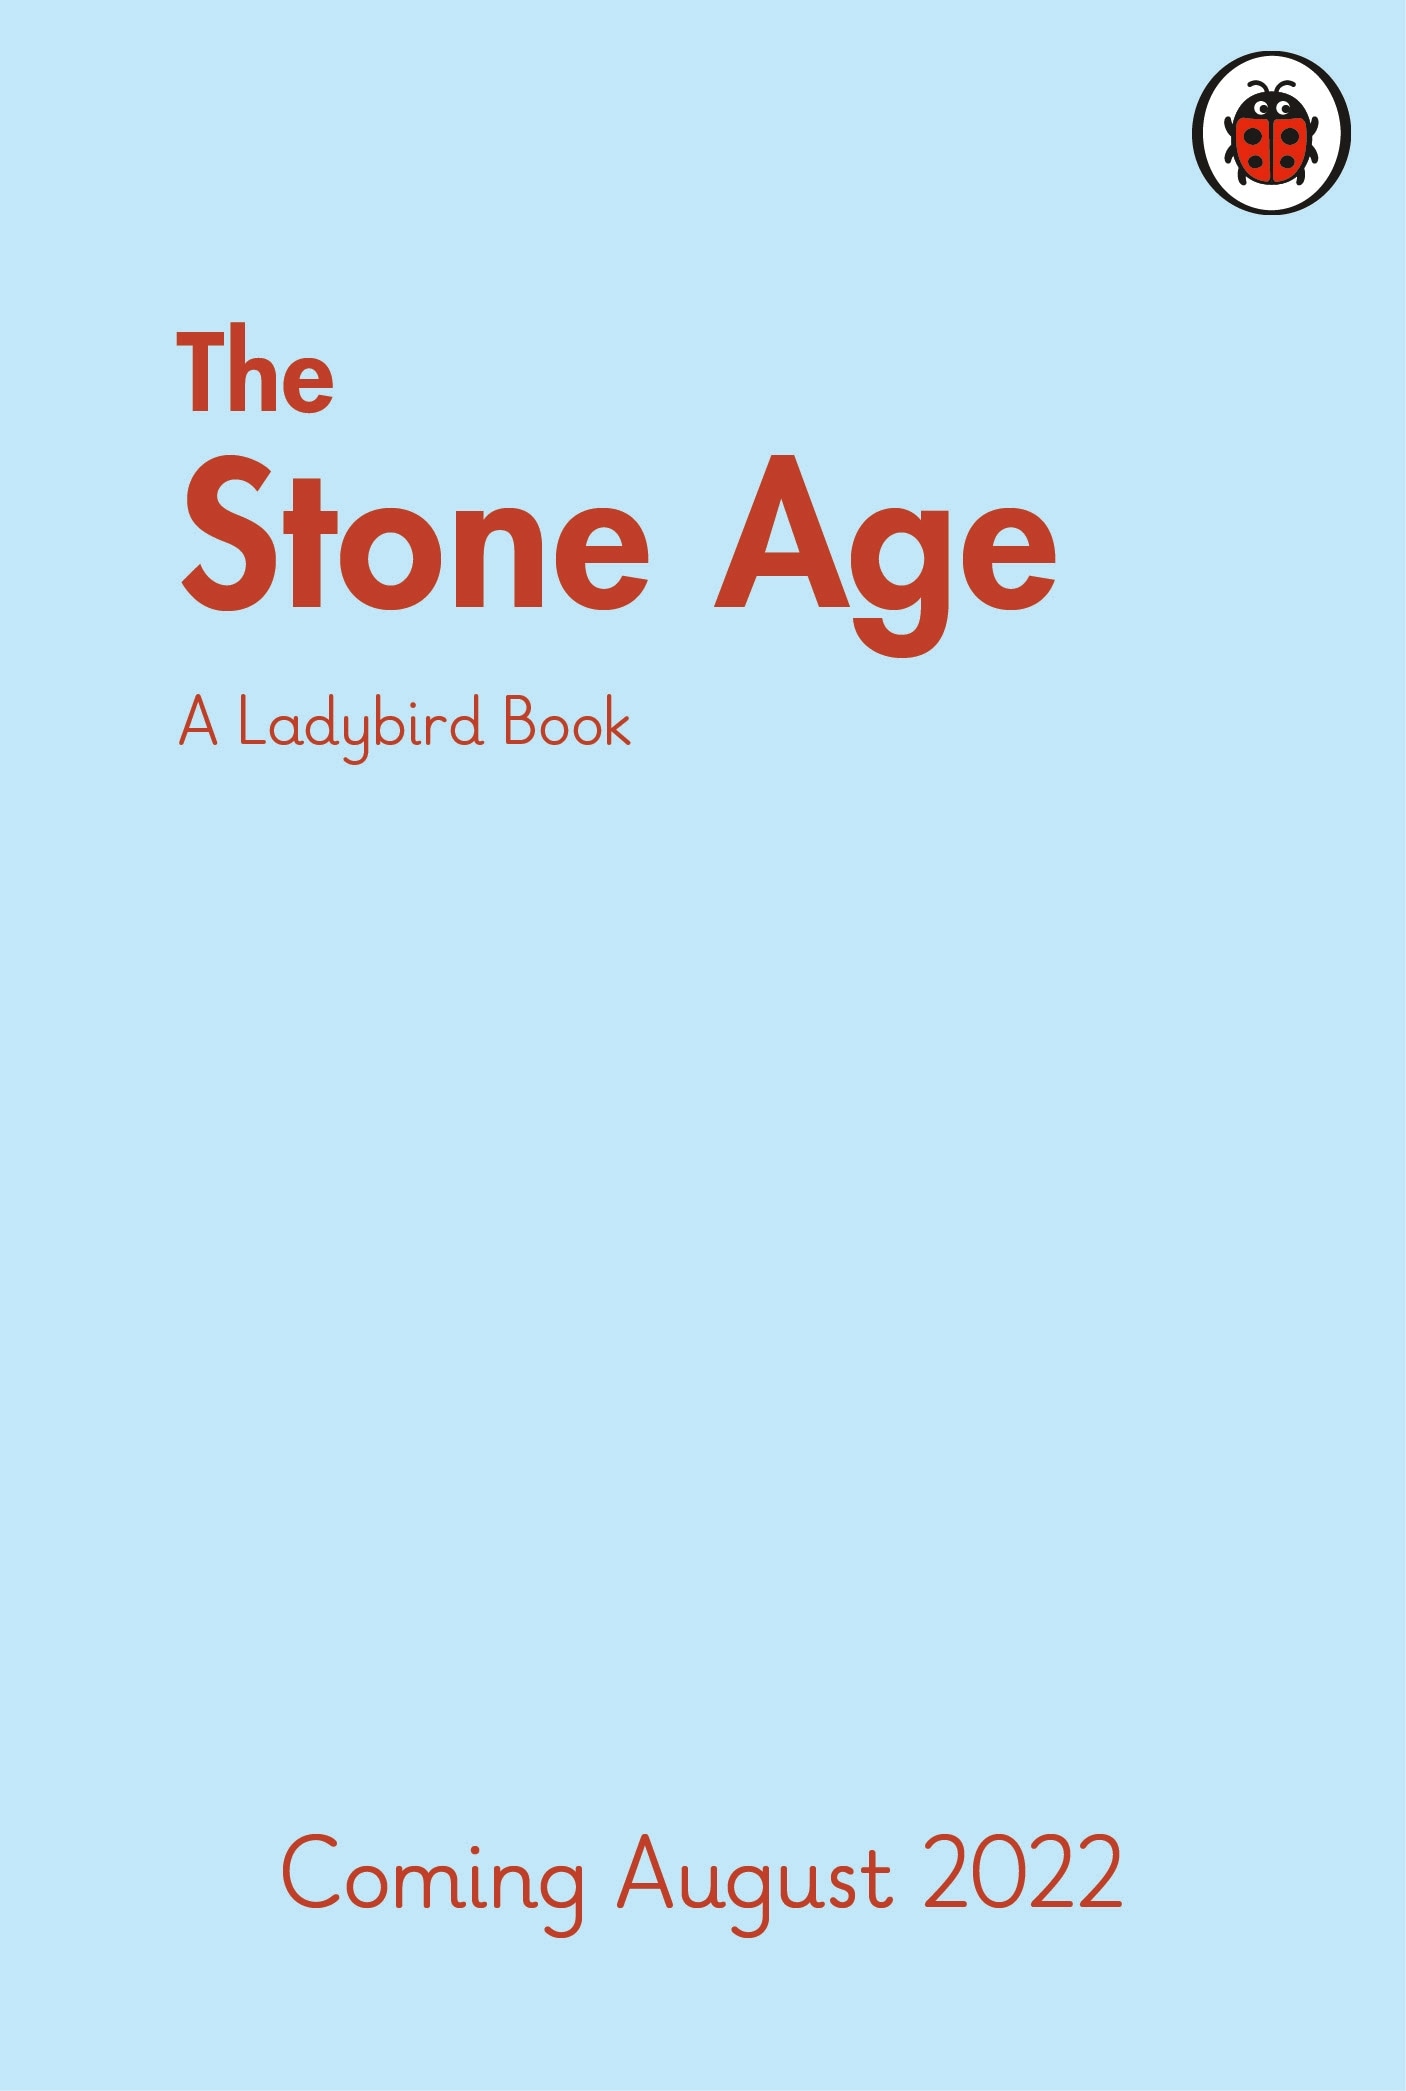 Book “A Ladybird Book: The Stone Age” by Sidra Ansari — August 4, 2022